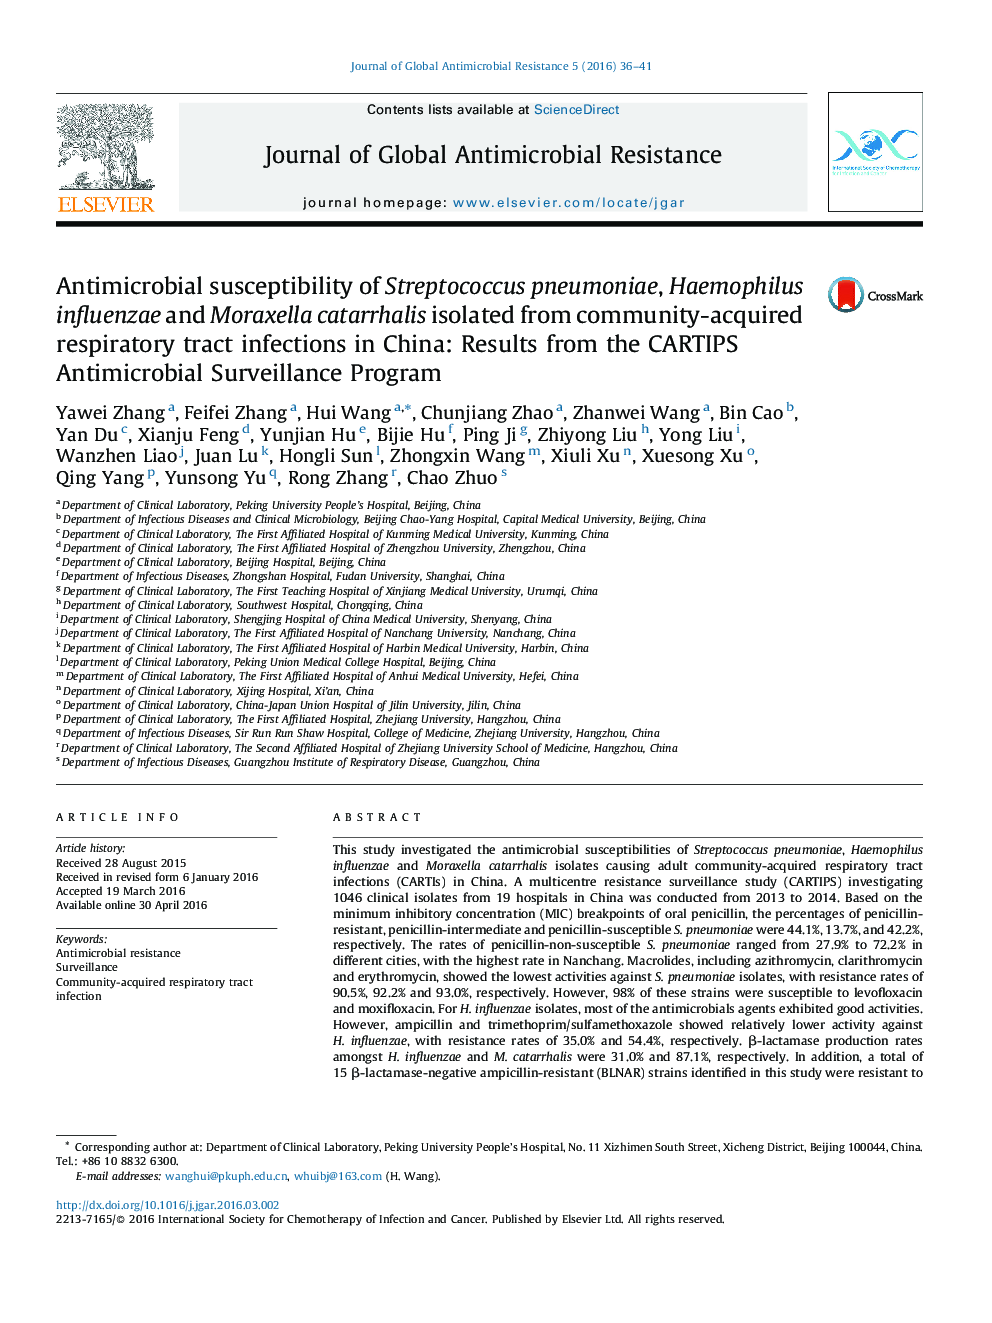 Antimicrobial susceptibility of Streptococcus pneumoniae, Haemophilus influenzae and Moraxella catarrhalis isolated from community-acquired respiratory tract infections in China: Results from the CARTIPS Antimicrobial Surveillance Program